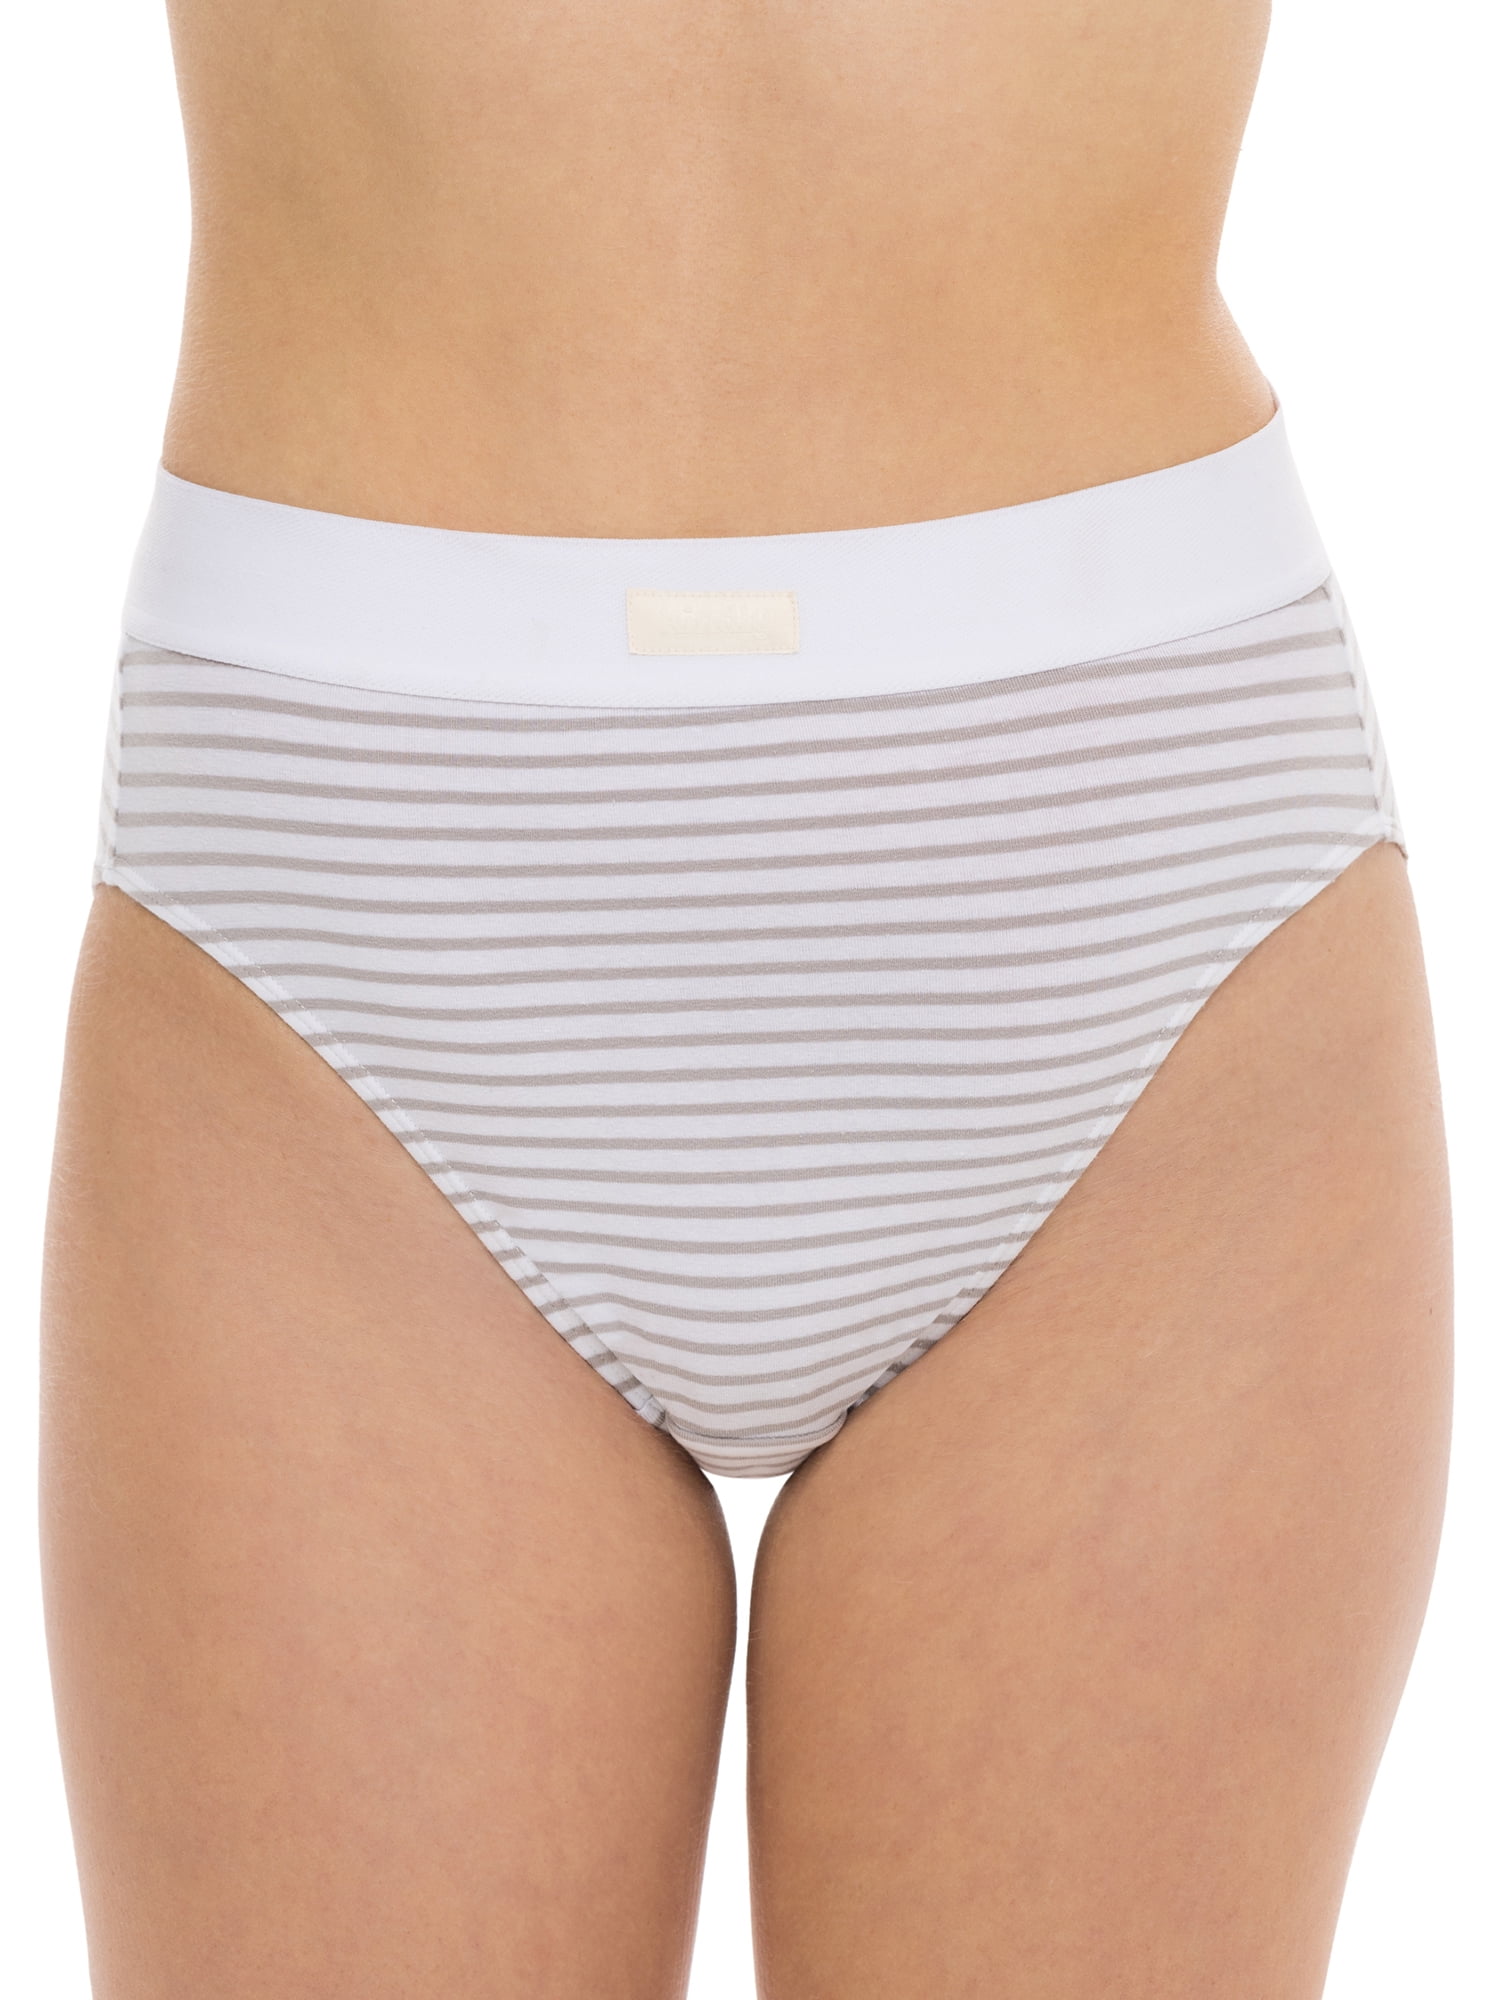 Kindly Yours Women's Sustainable Cotton Hi-Cut Underwear, 3-Pack, Sizes XS  to XXXL 